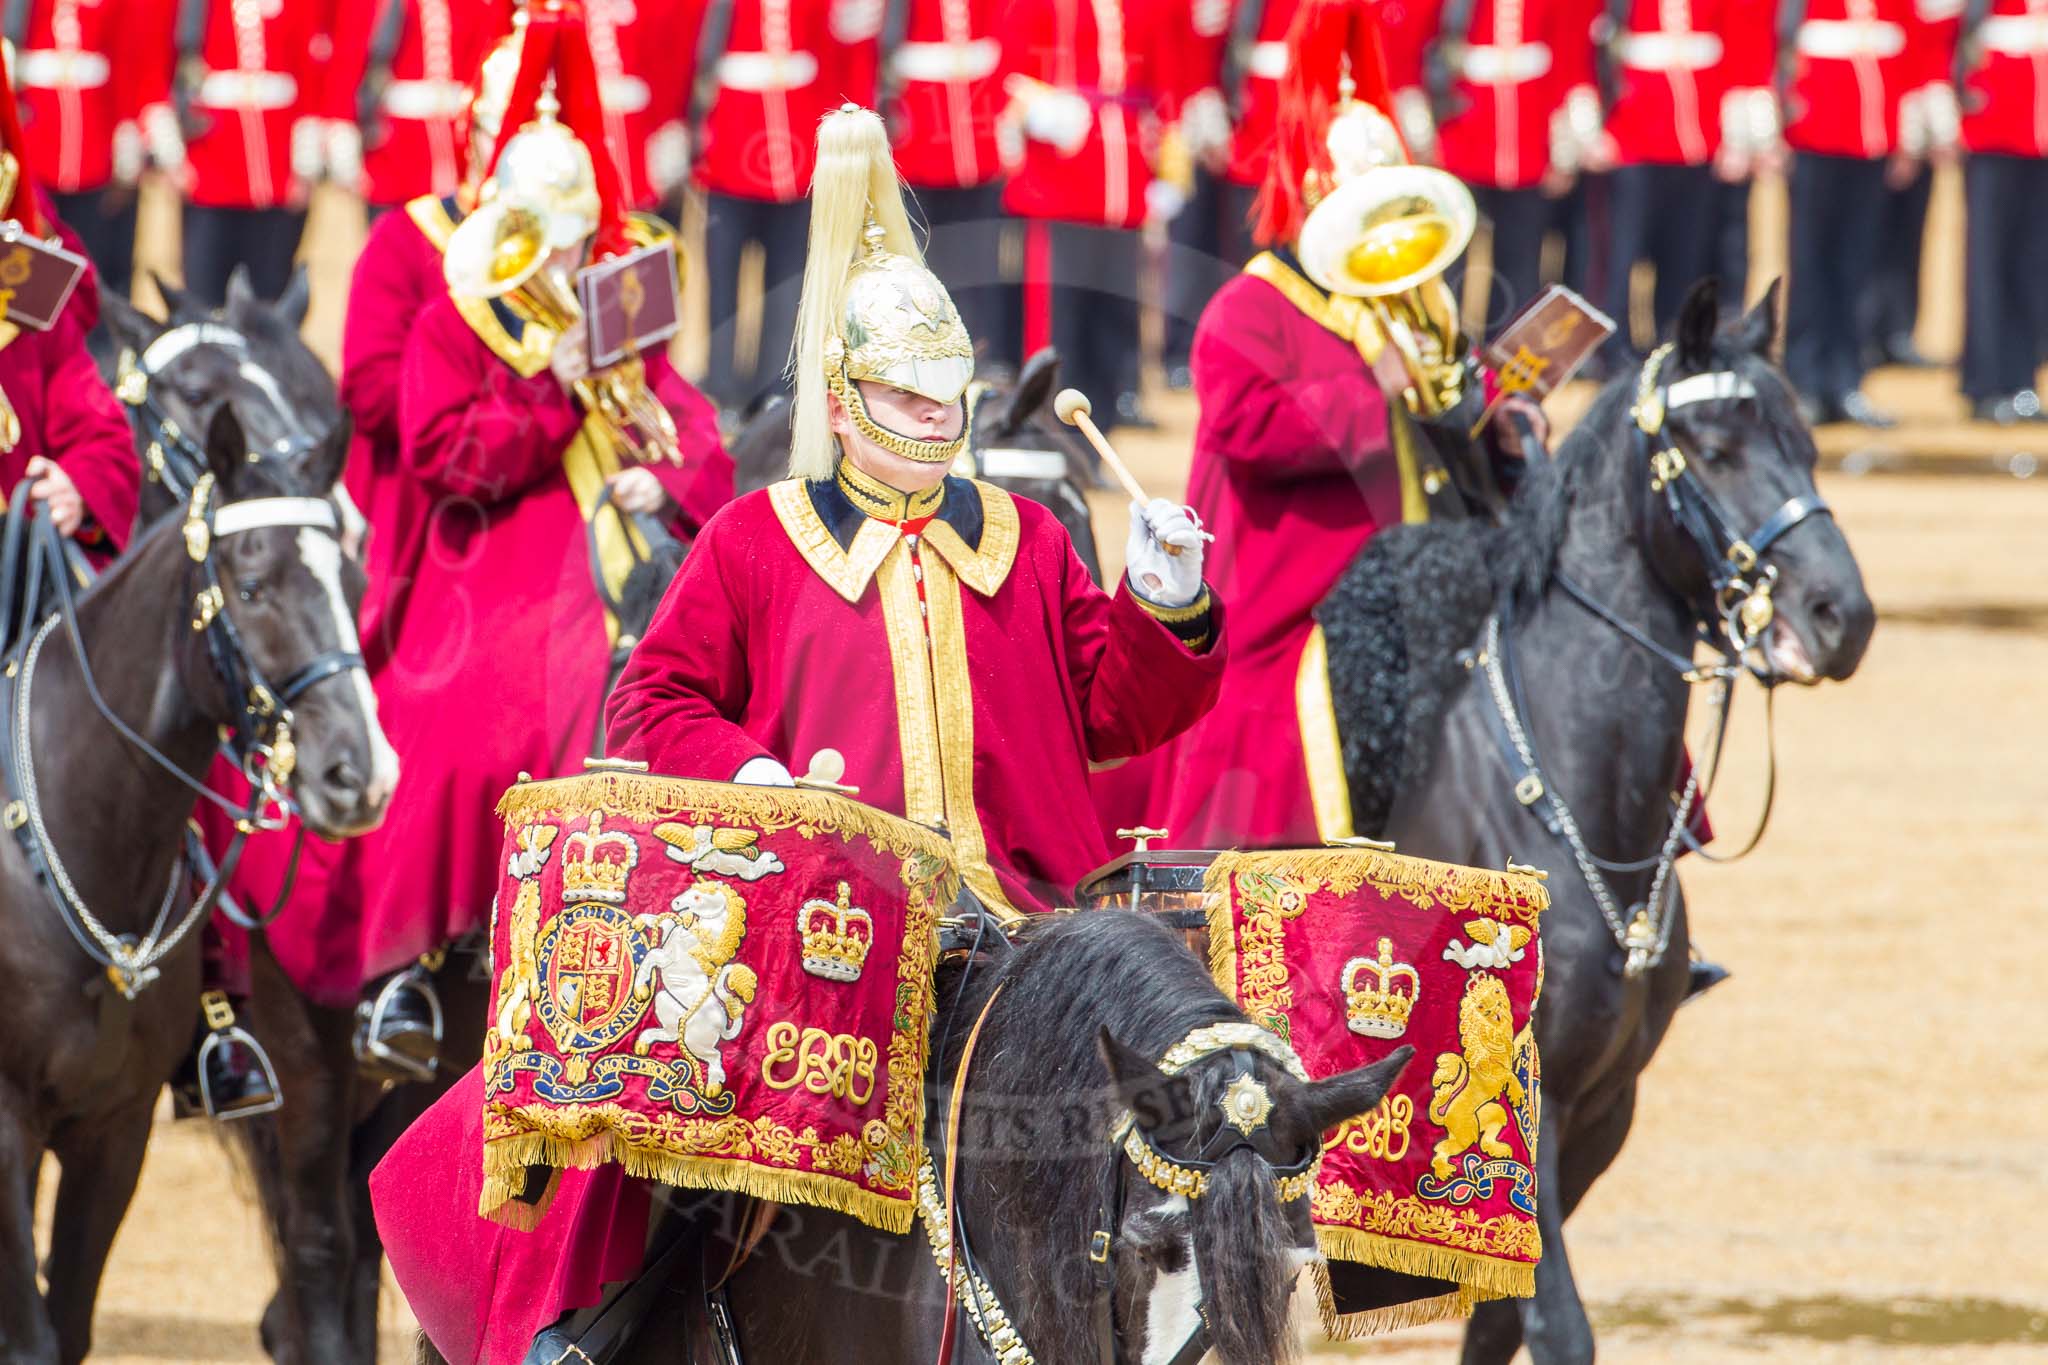 The Colonel's Review 2014.
Horse Guards Parade, Westminster,
London,

United Kingdom,
on 07 June 2014 at 11:52, image #600